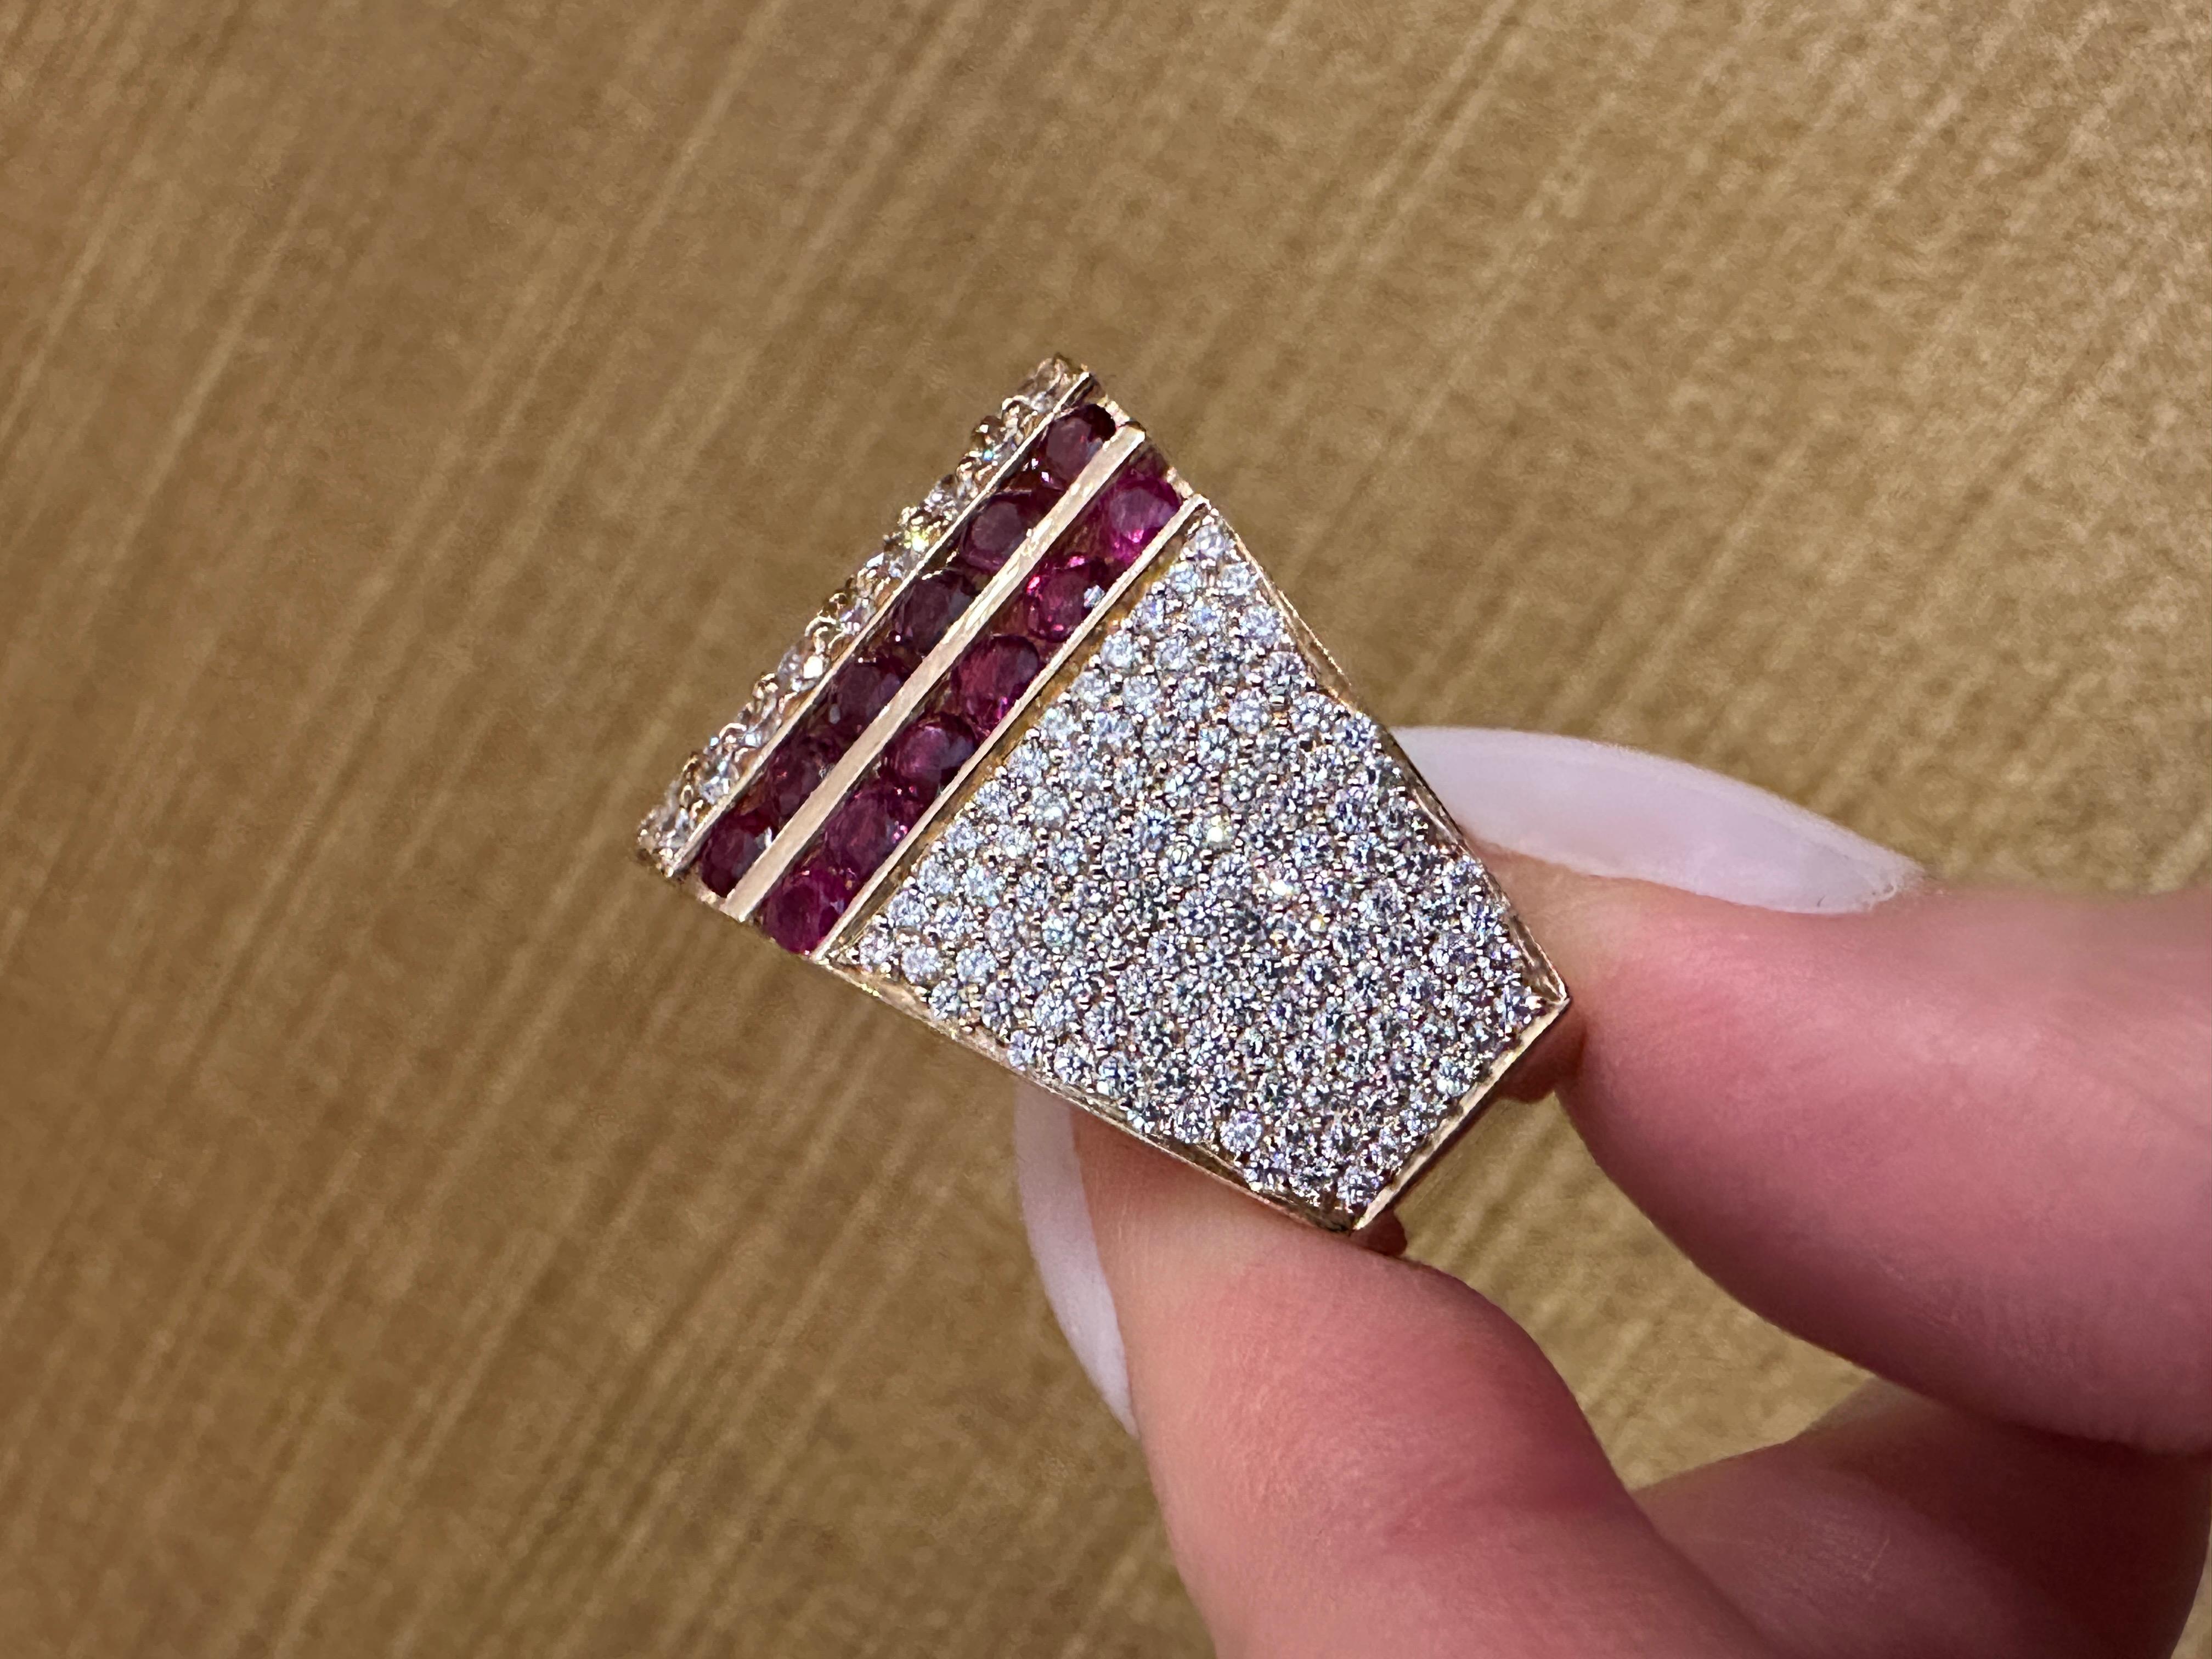 Wide Band Ruby and Diamond Ring in 14 Yellow Gold

Ruby and Pave Diamond Ring features Natural Round Full-cut Brilliant Diamonds set in vertical rows with Round Rubies channel-set in 5 rows set in 14k Yellow Gold by Jewels of Gauthier of Scottsdale